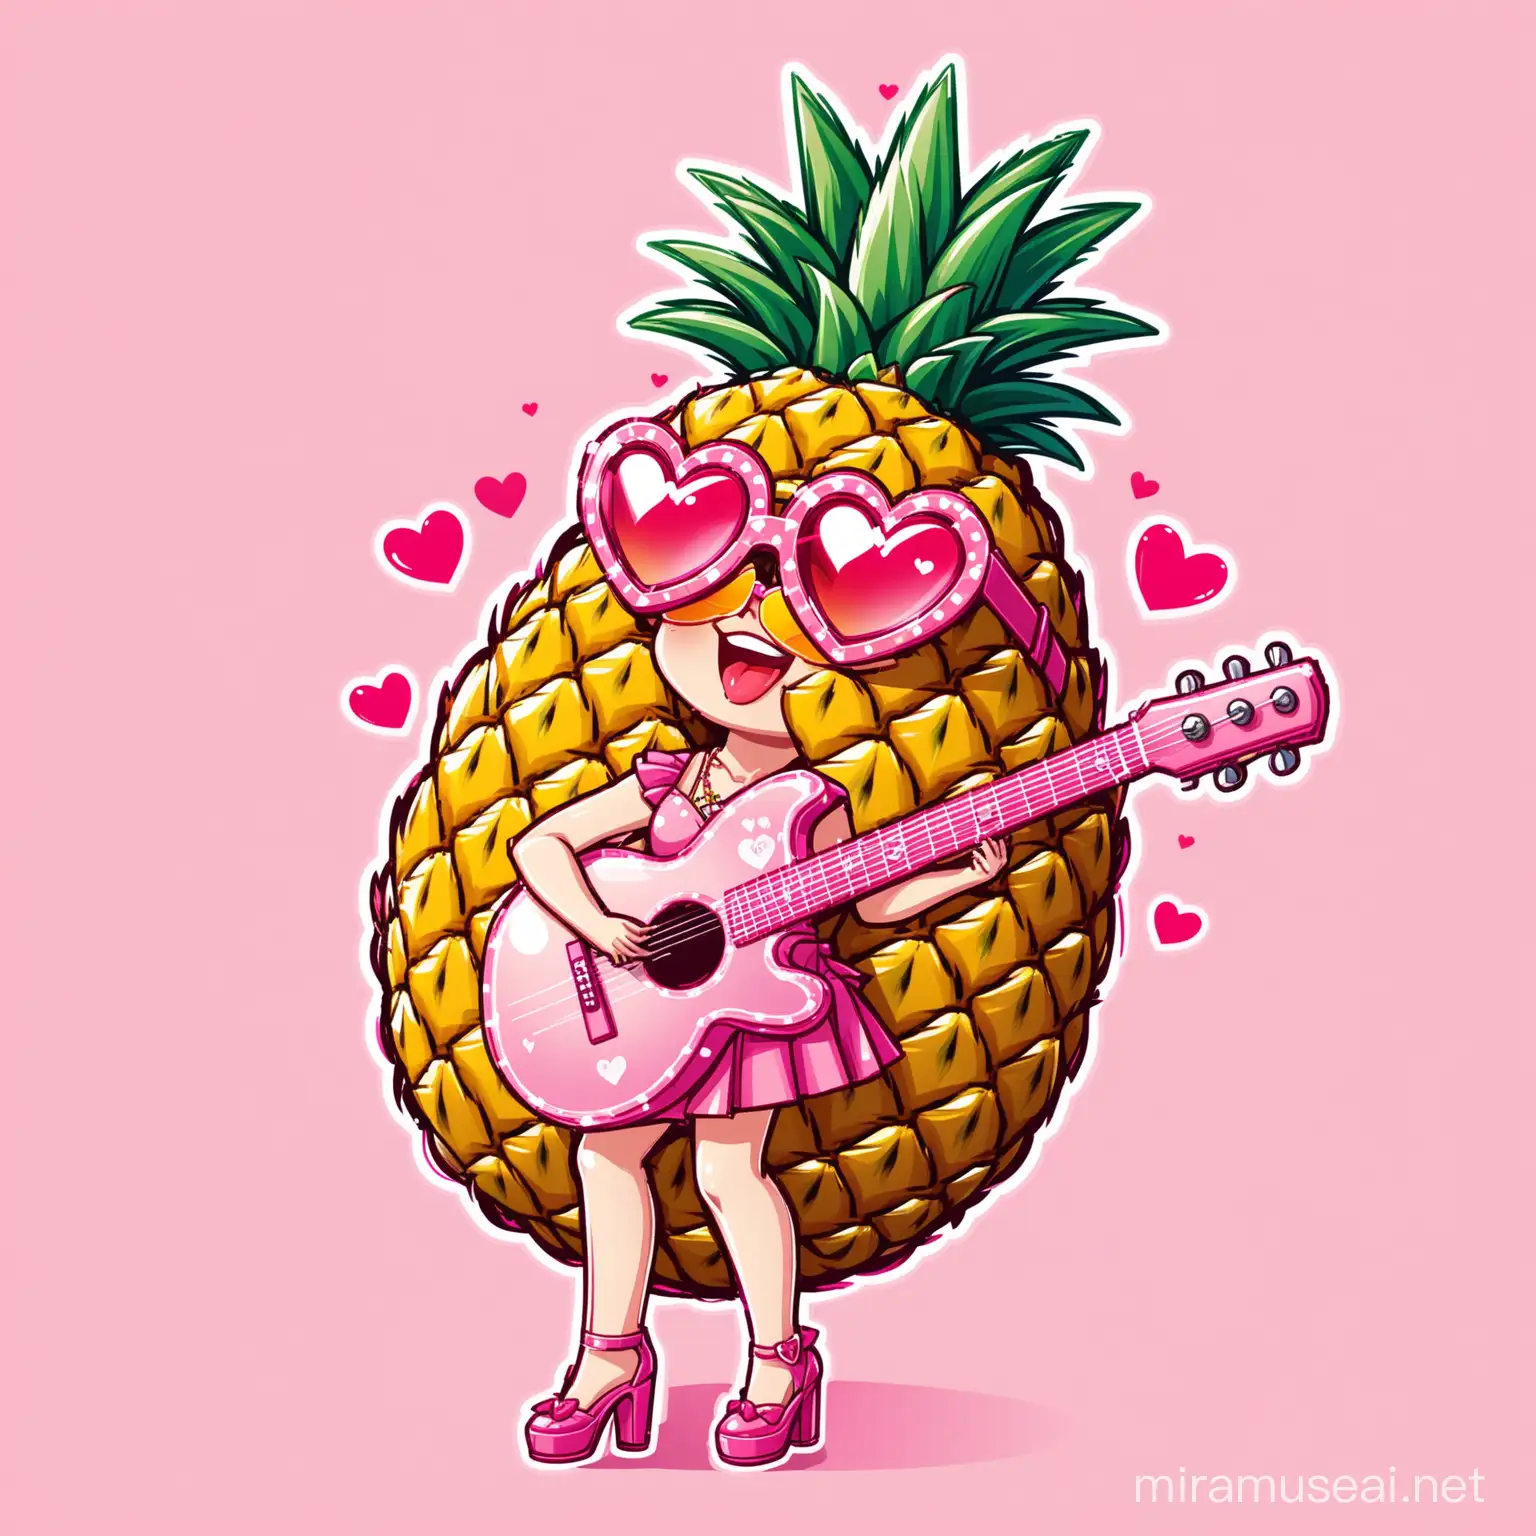 A logo of a pineapple wearing heart shaped glasses a pink skirt and pink heels and a pineapple shaped guitar